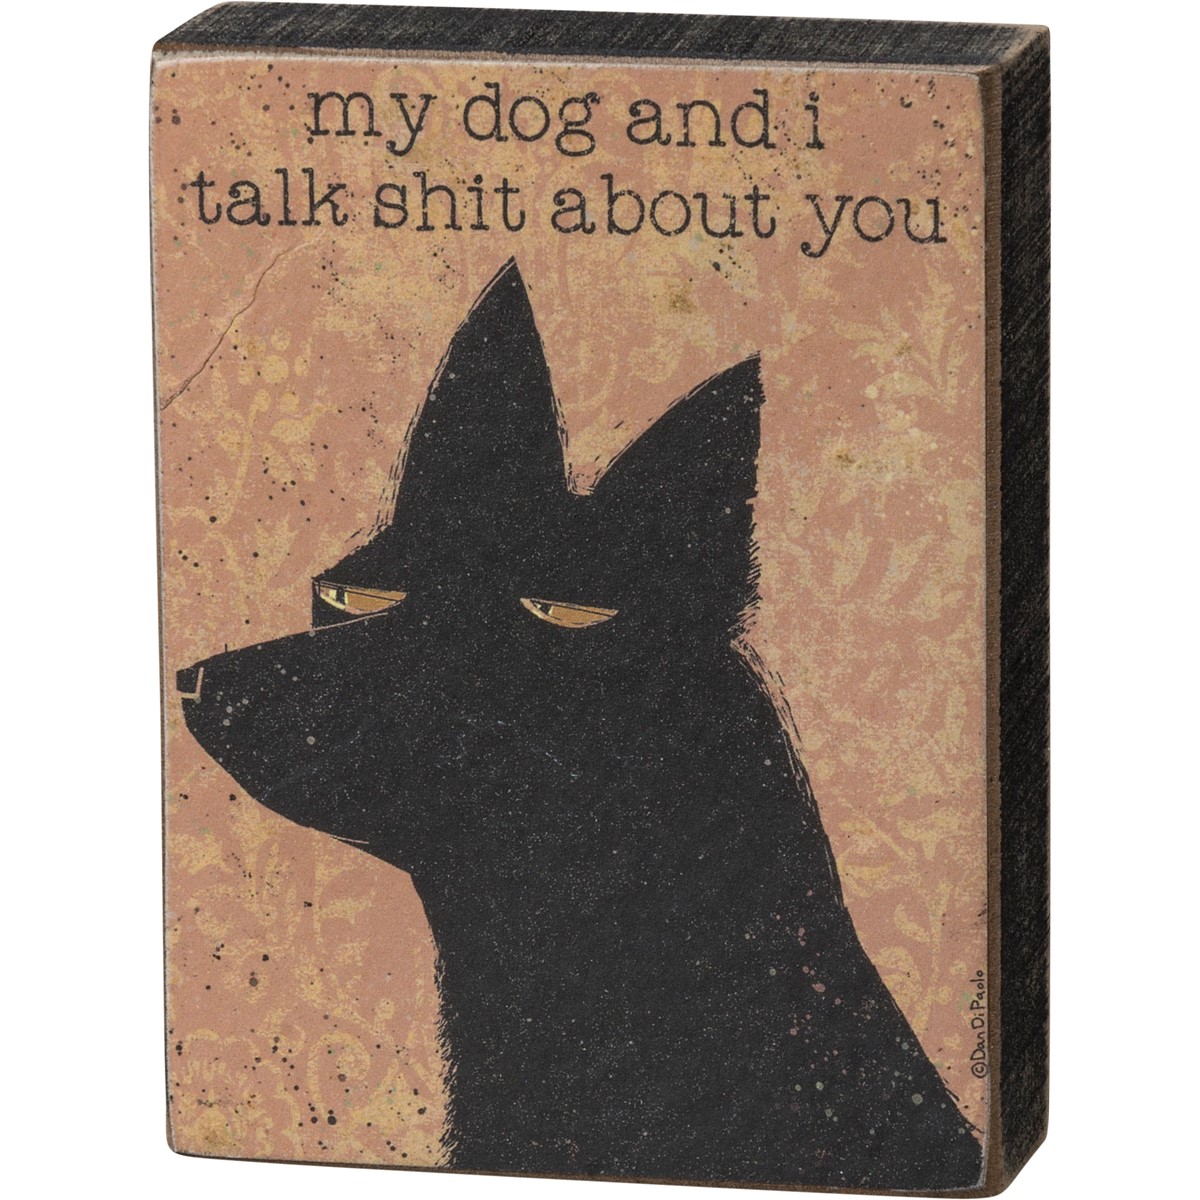 Block Sign - My Dog And I Talk Shit About You - 3" x 4" x 1" - Wood, Paper